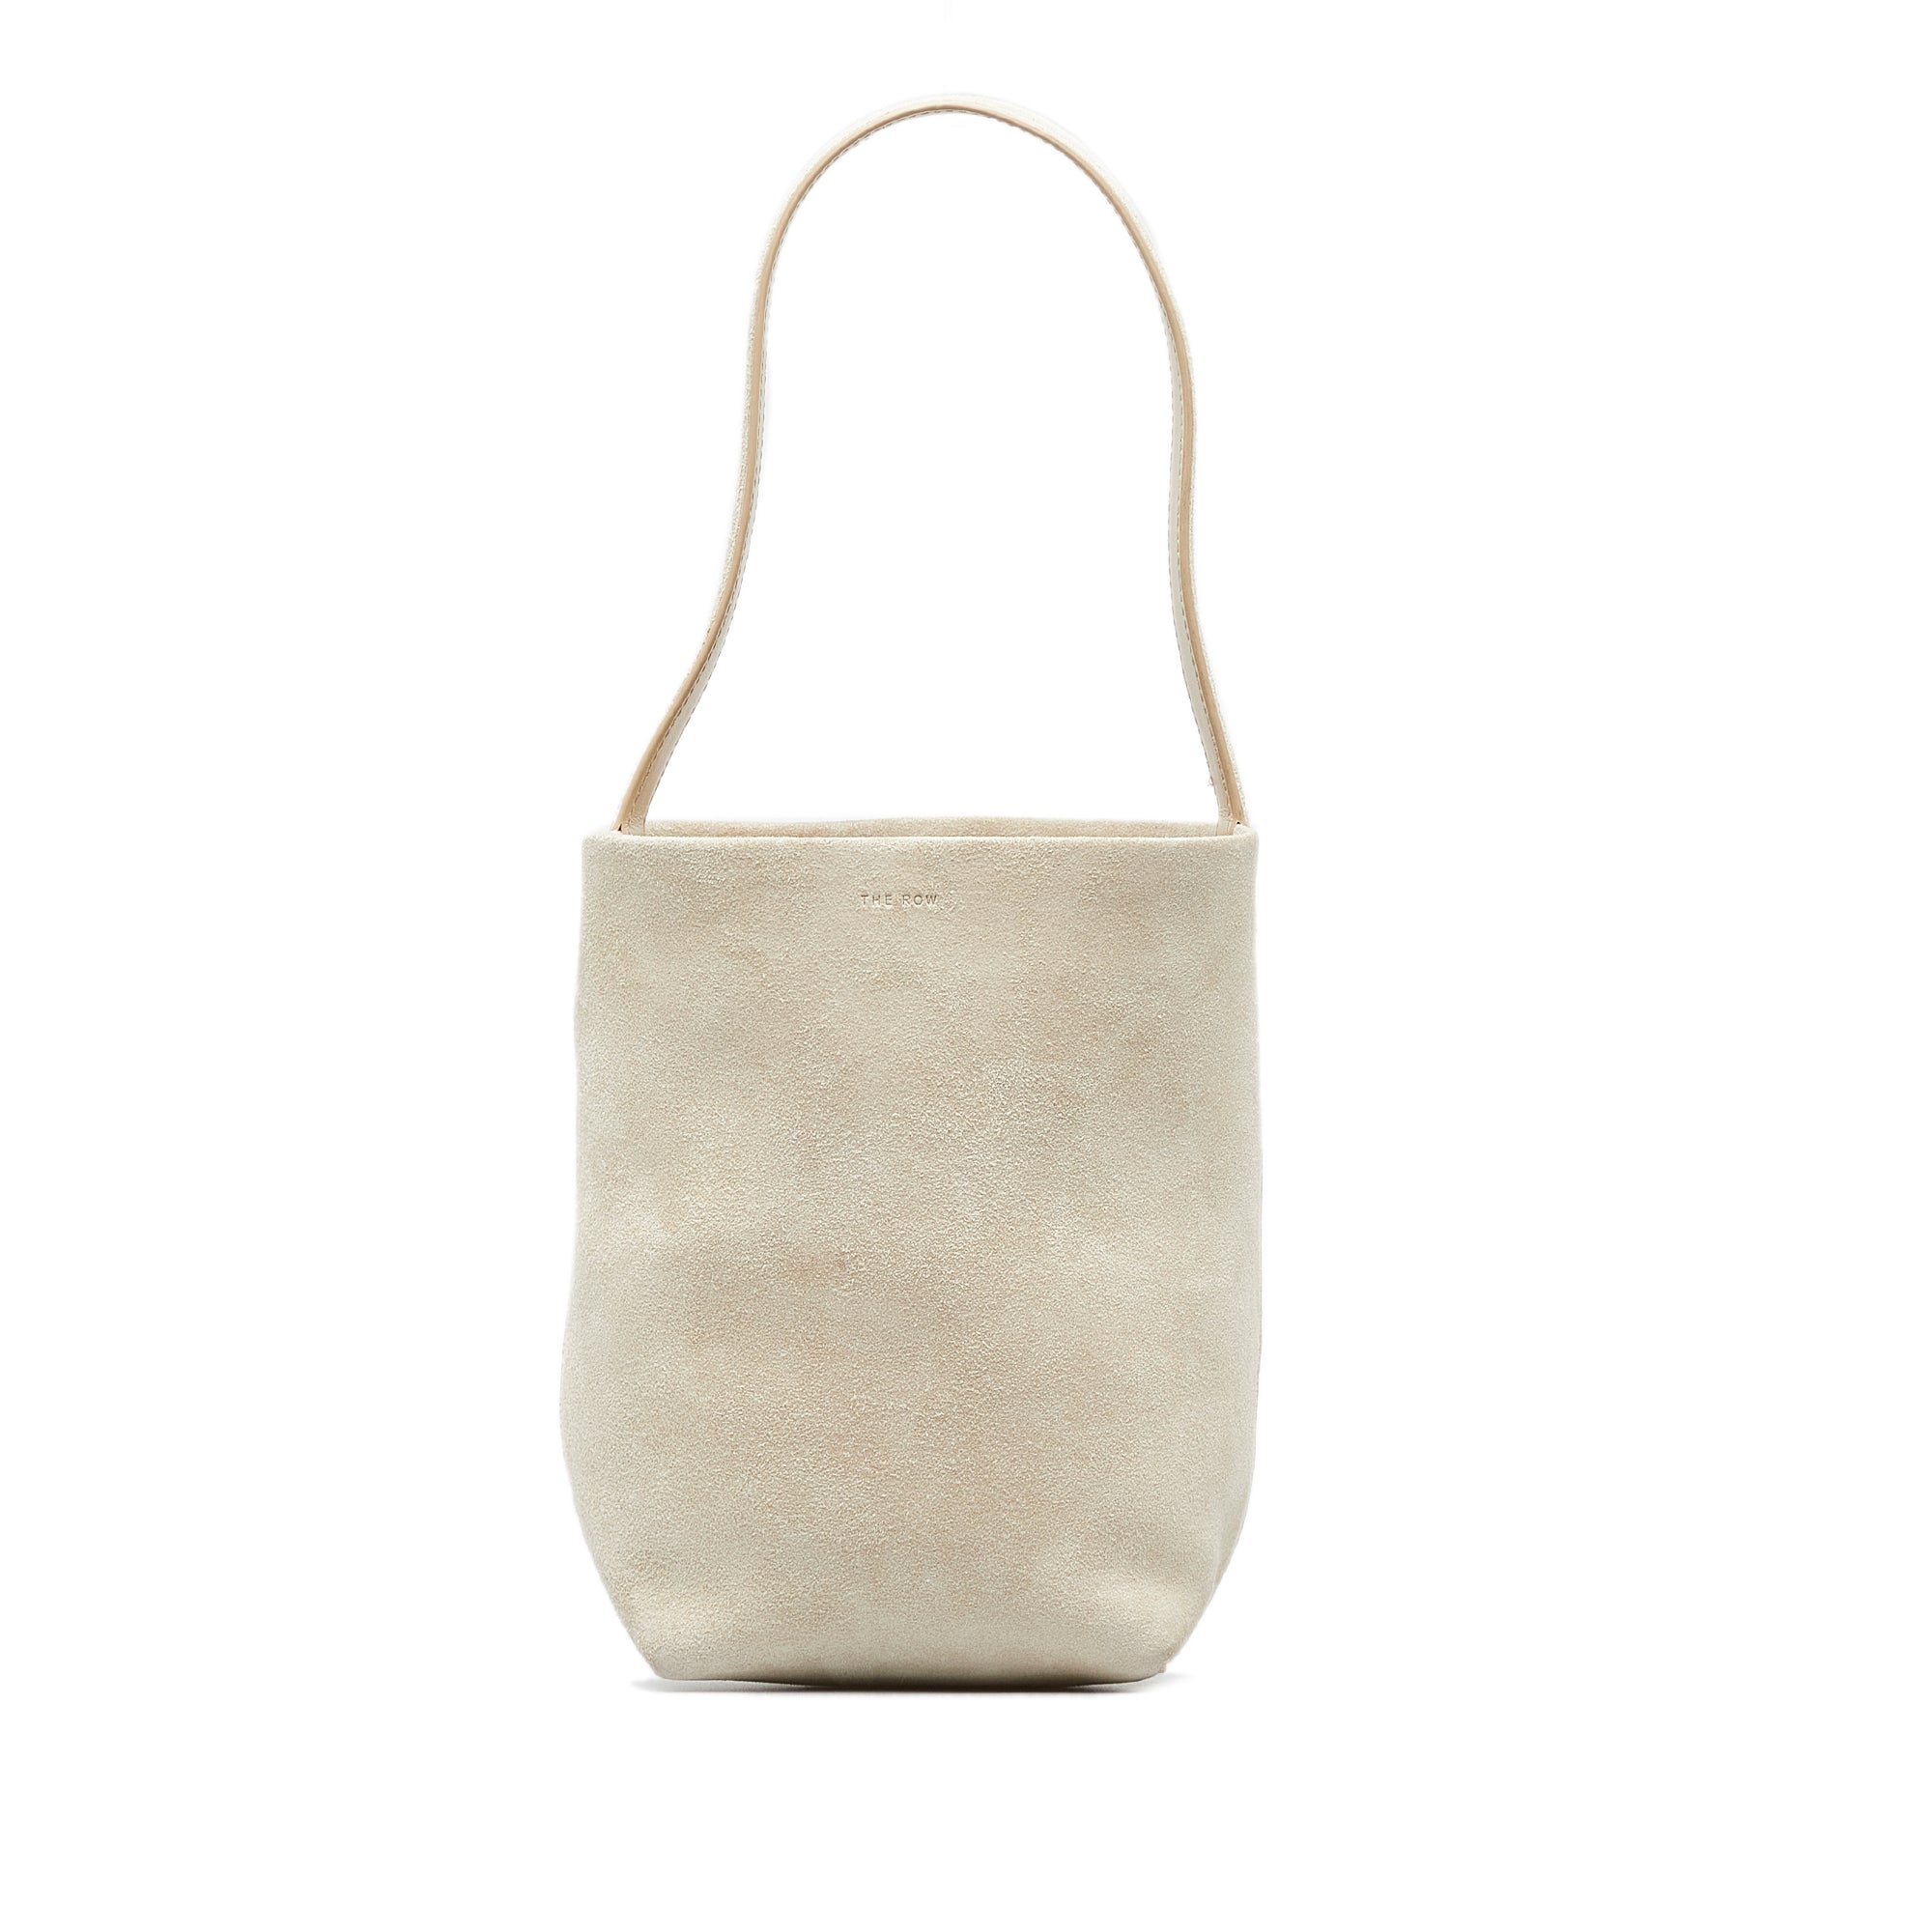 Park Small Leather Shoulder Bag in Beige - The Row